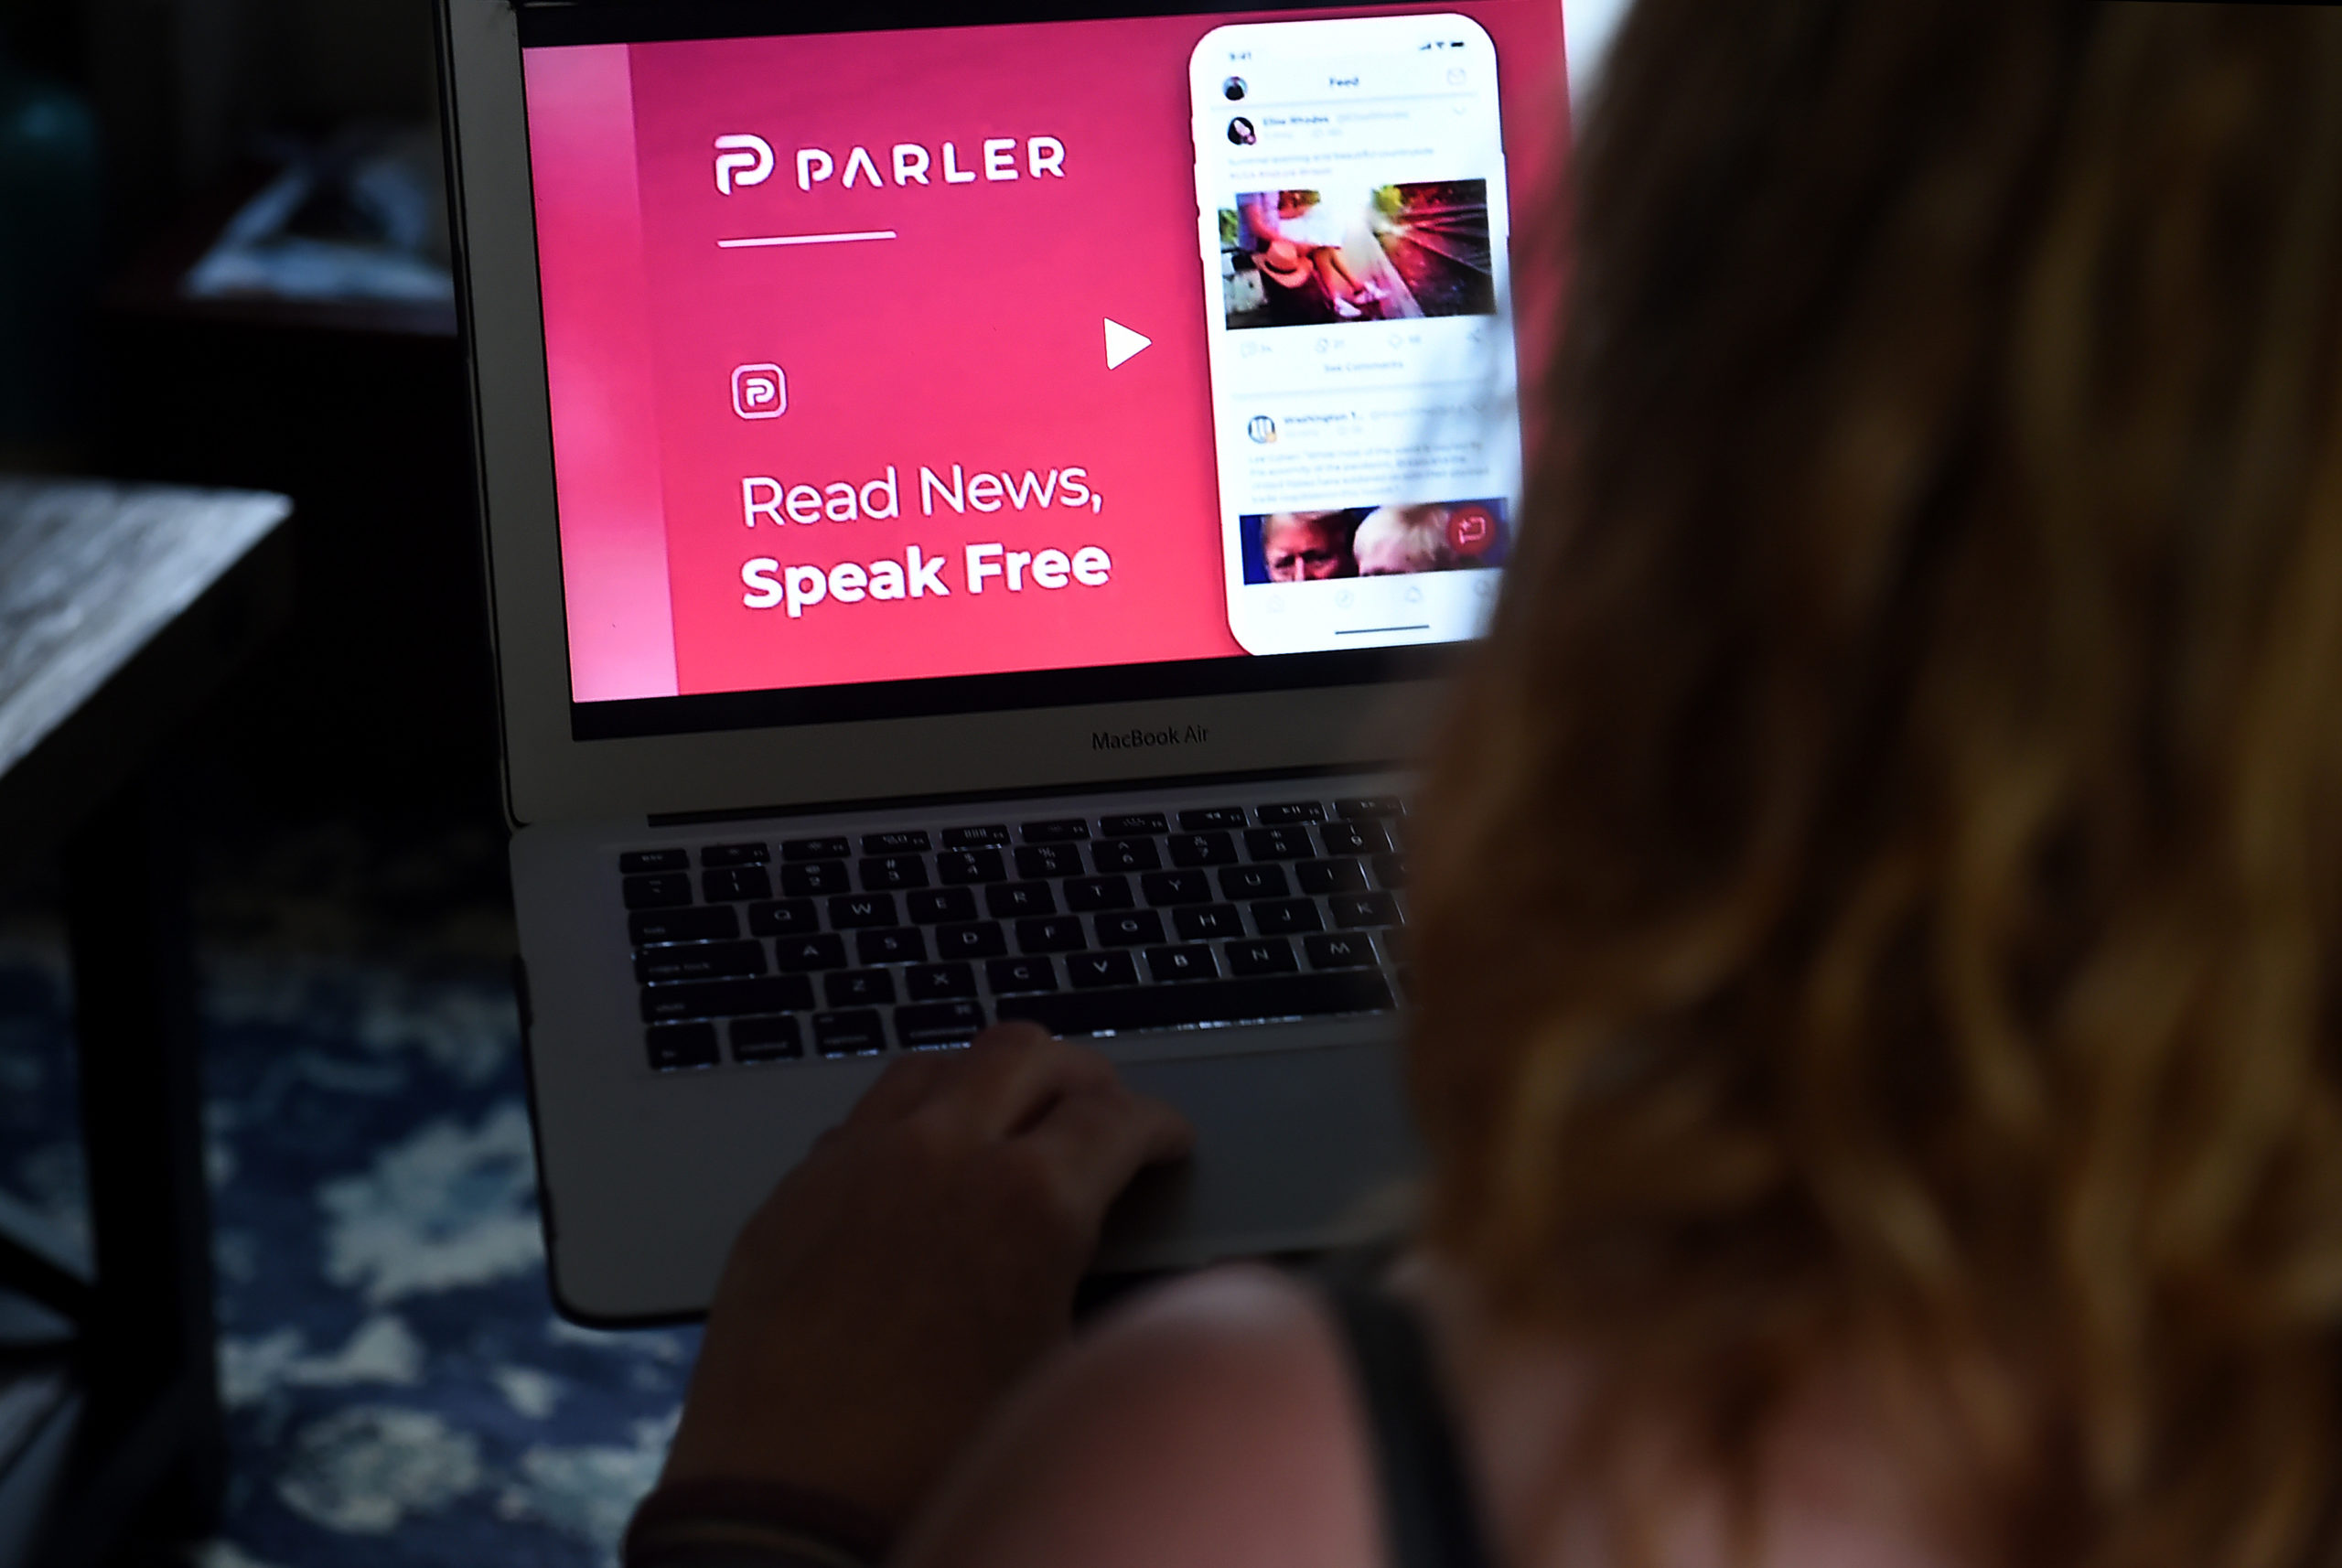 This illustration picture shows the social media website from Parler displayed on a computer screen in Arlington, Virginia on July 2, 2020. - Amid rising turmoil in social media, recently formed social network Parler is gaining with prominent political conservatives who claim their voices are being silenced by Silicon Valley giants. Parler, founded in Nevada in 2018, bills itself as an alternative to "ideological suppression" at other social networks. (Photo by Olivier DOULIERY / AFP) (Photo by OLIVIER DOULIERY/AFP via Getty Images)